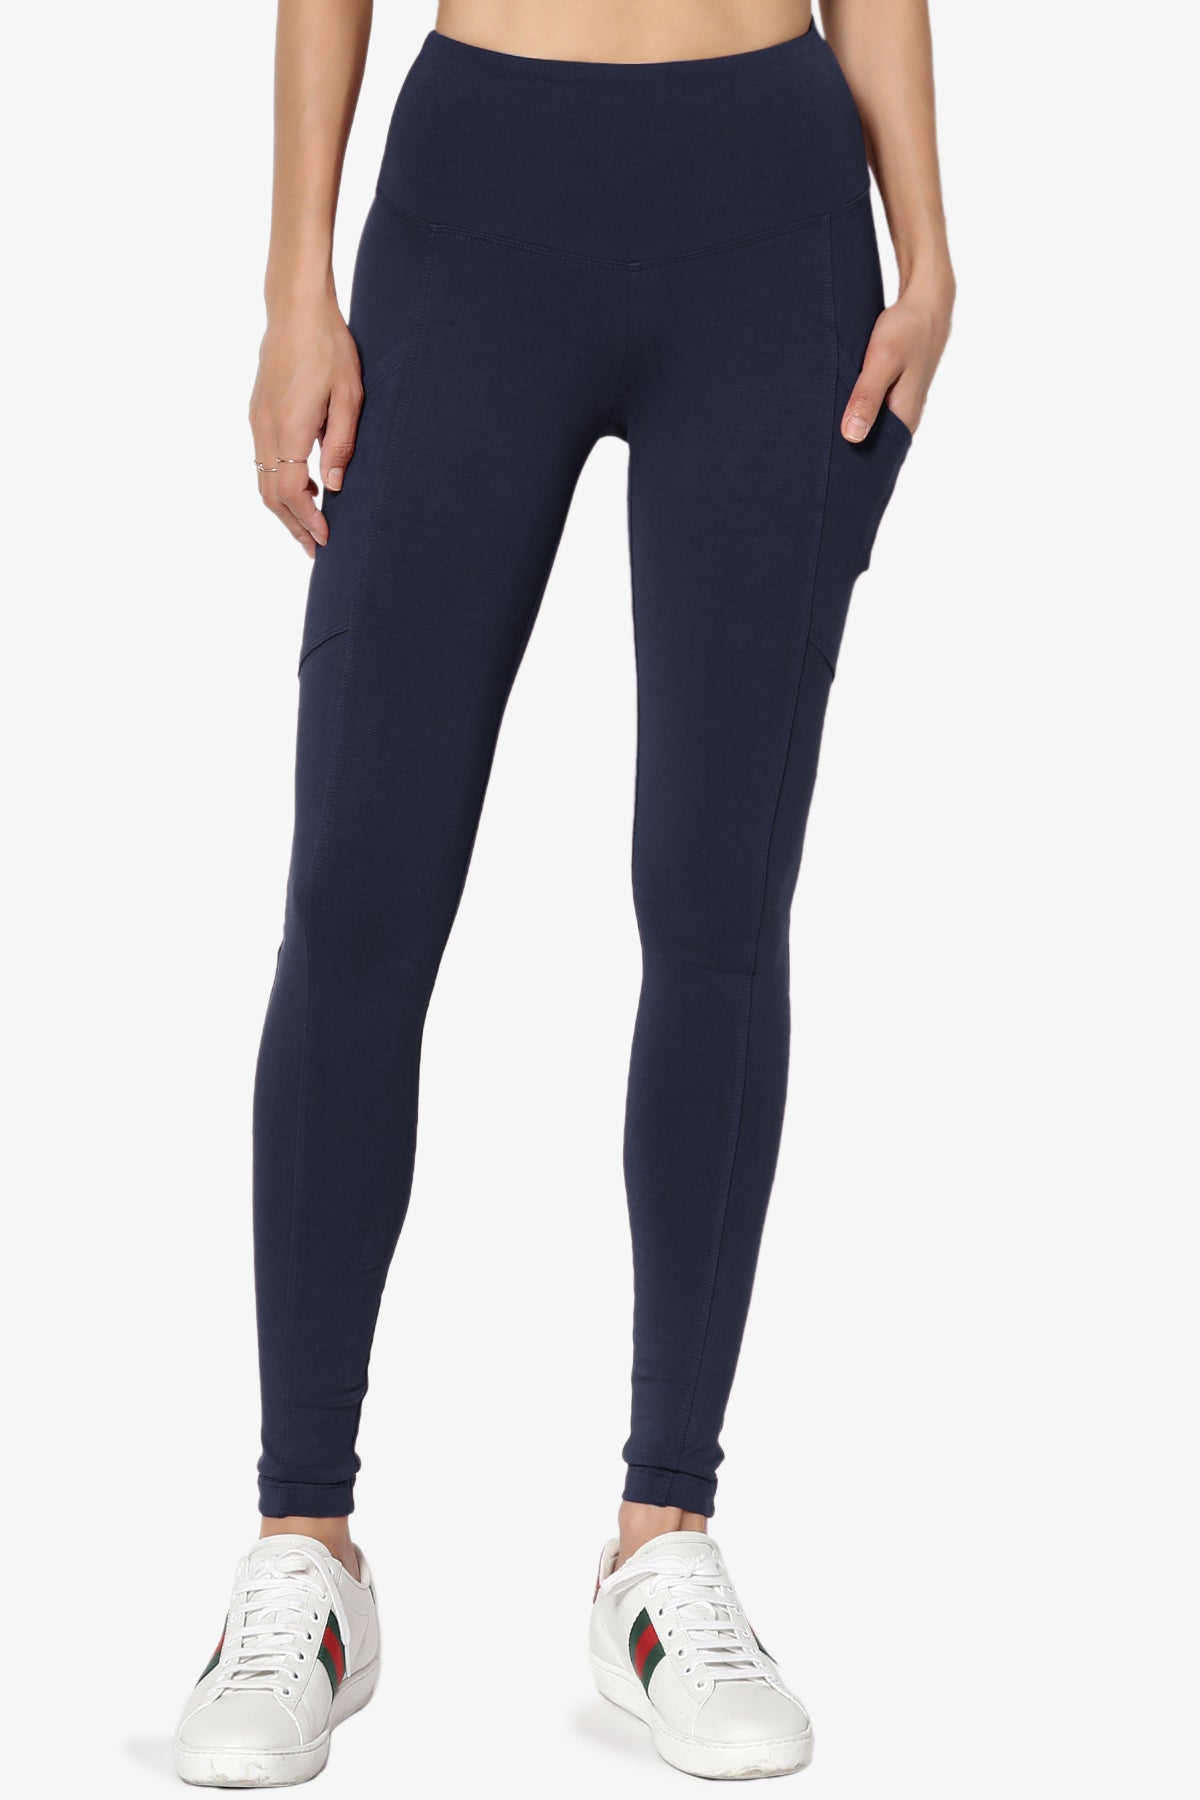 Ansley Luxe Cotton Leggings with Pockets NAVY_3